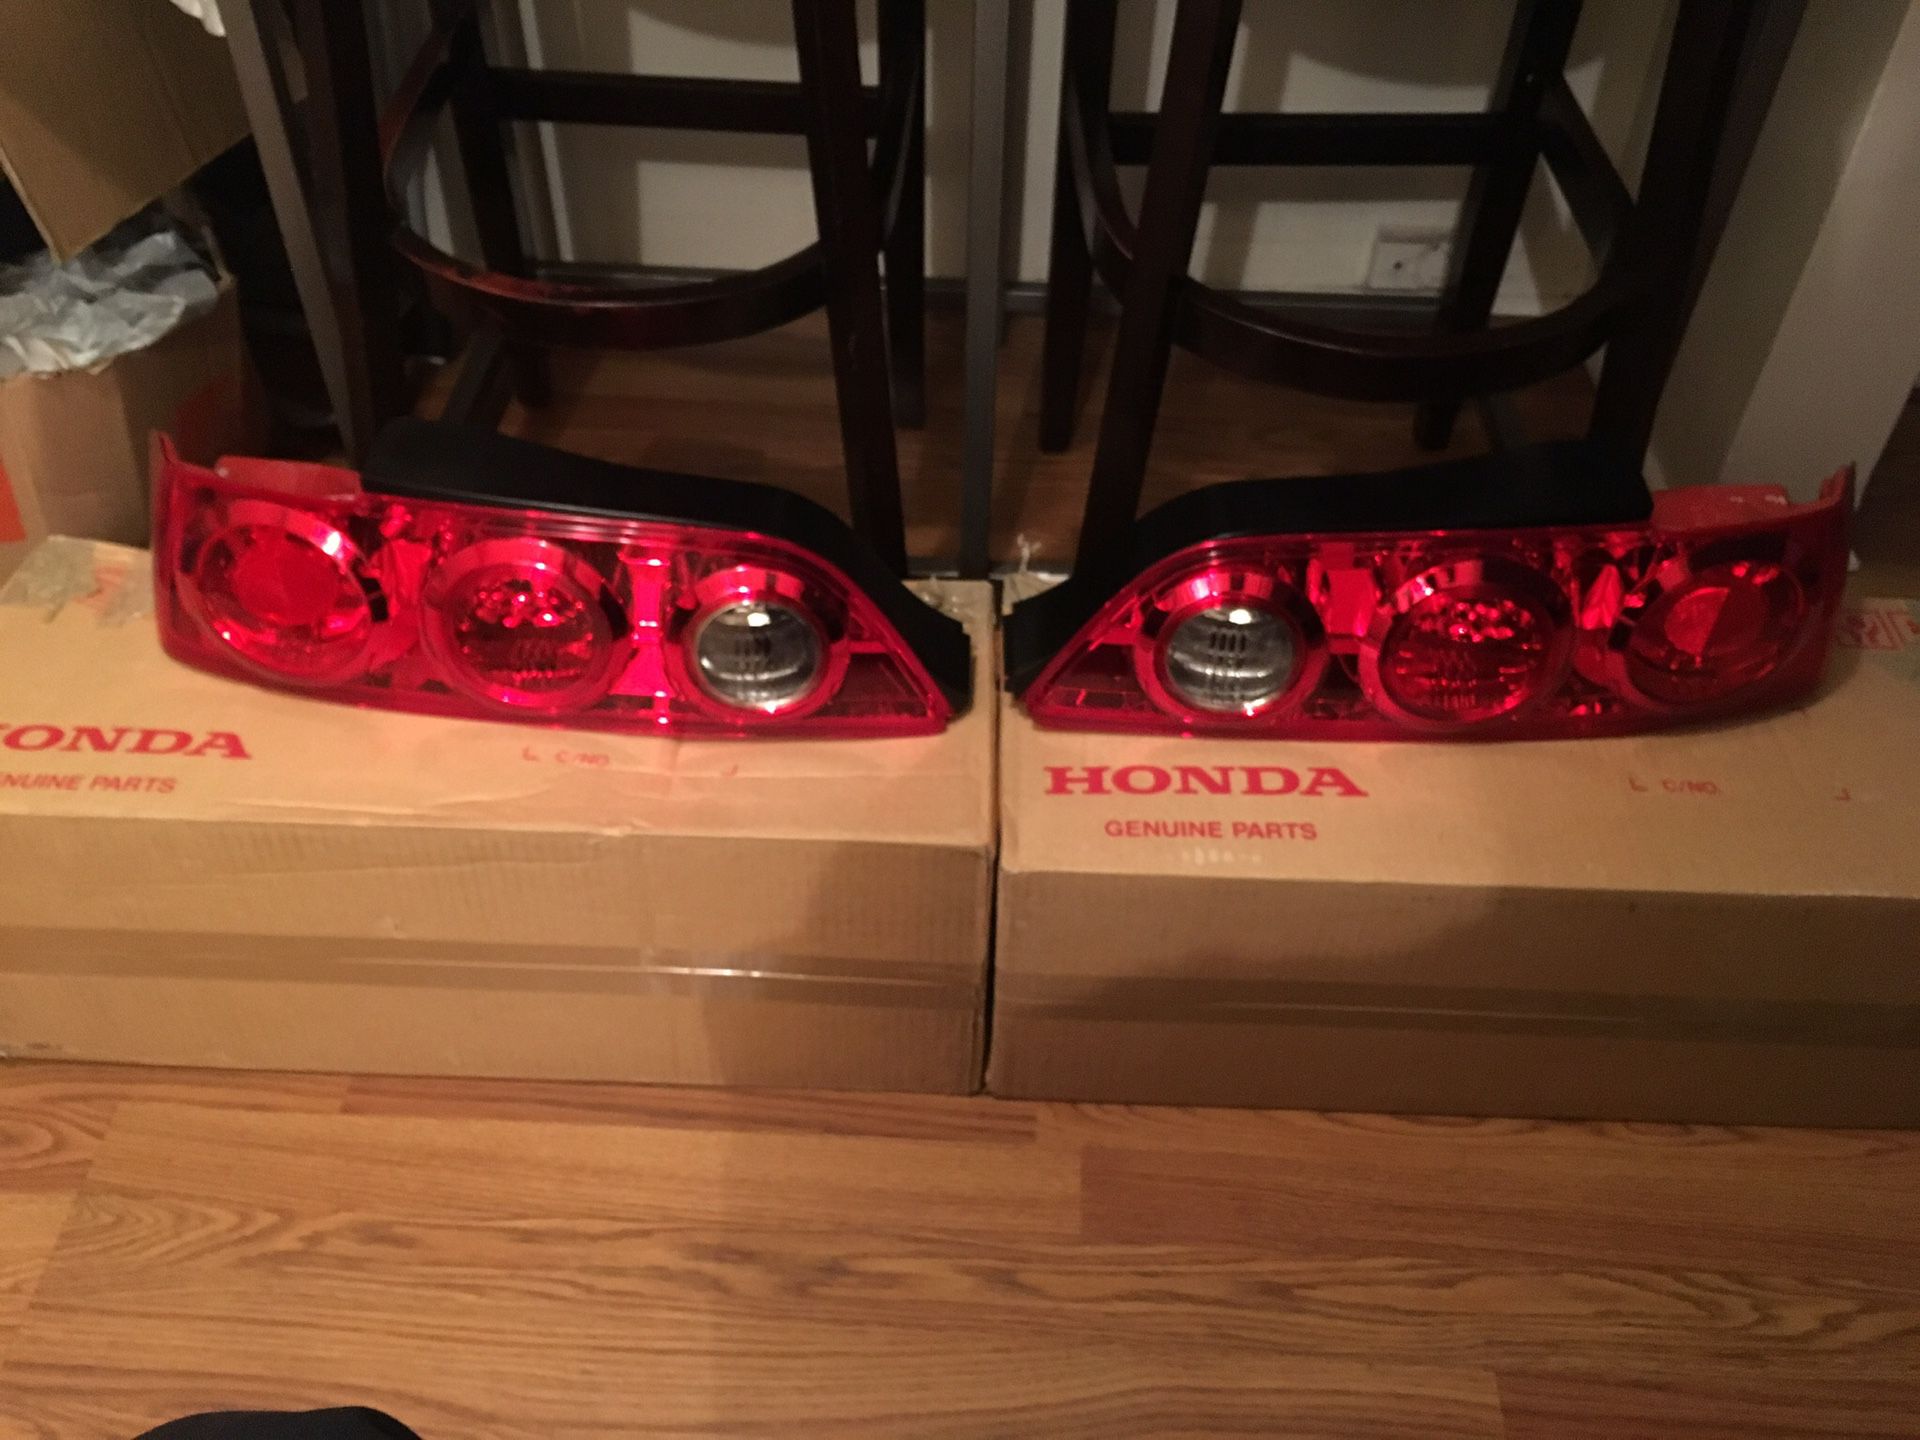 2005-2006 Acura Rsx Dc5 Type S/Base Oem Honda Part-Rear Tail Lights-Like new , Asking $400.00 Firm 10 out of 10 condition